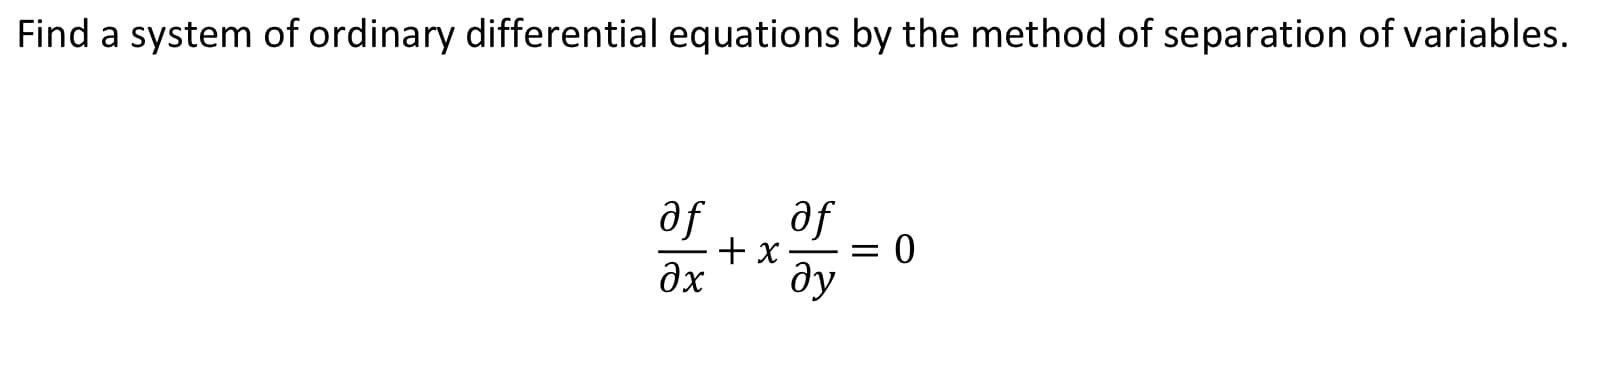 Find a system of ordinary differential equations by the method of separation of variables.
af
af
дх
ду
